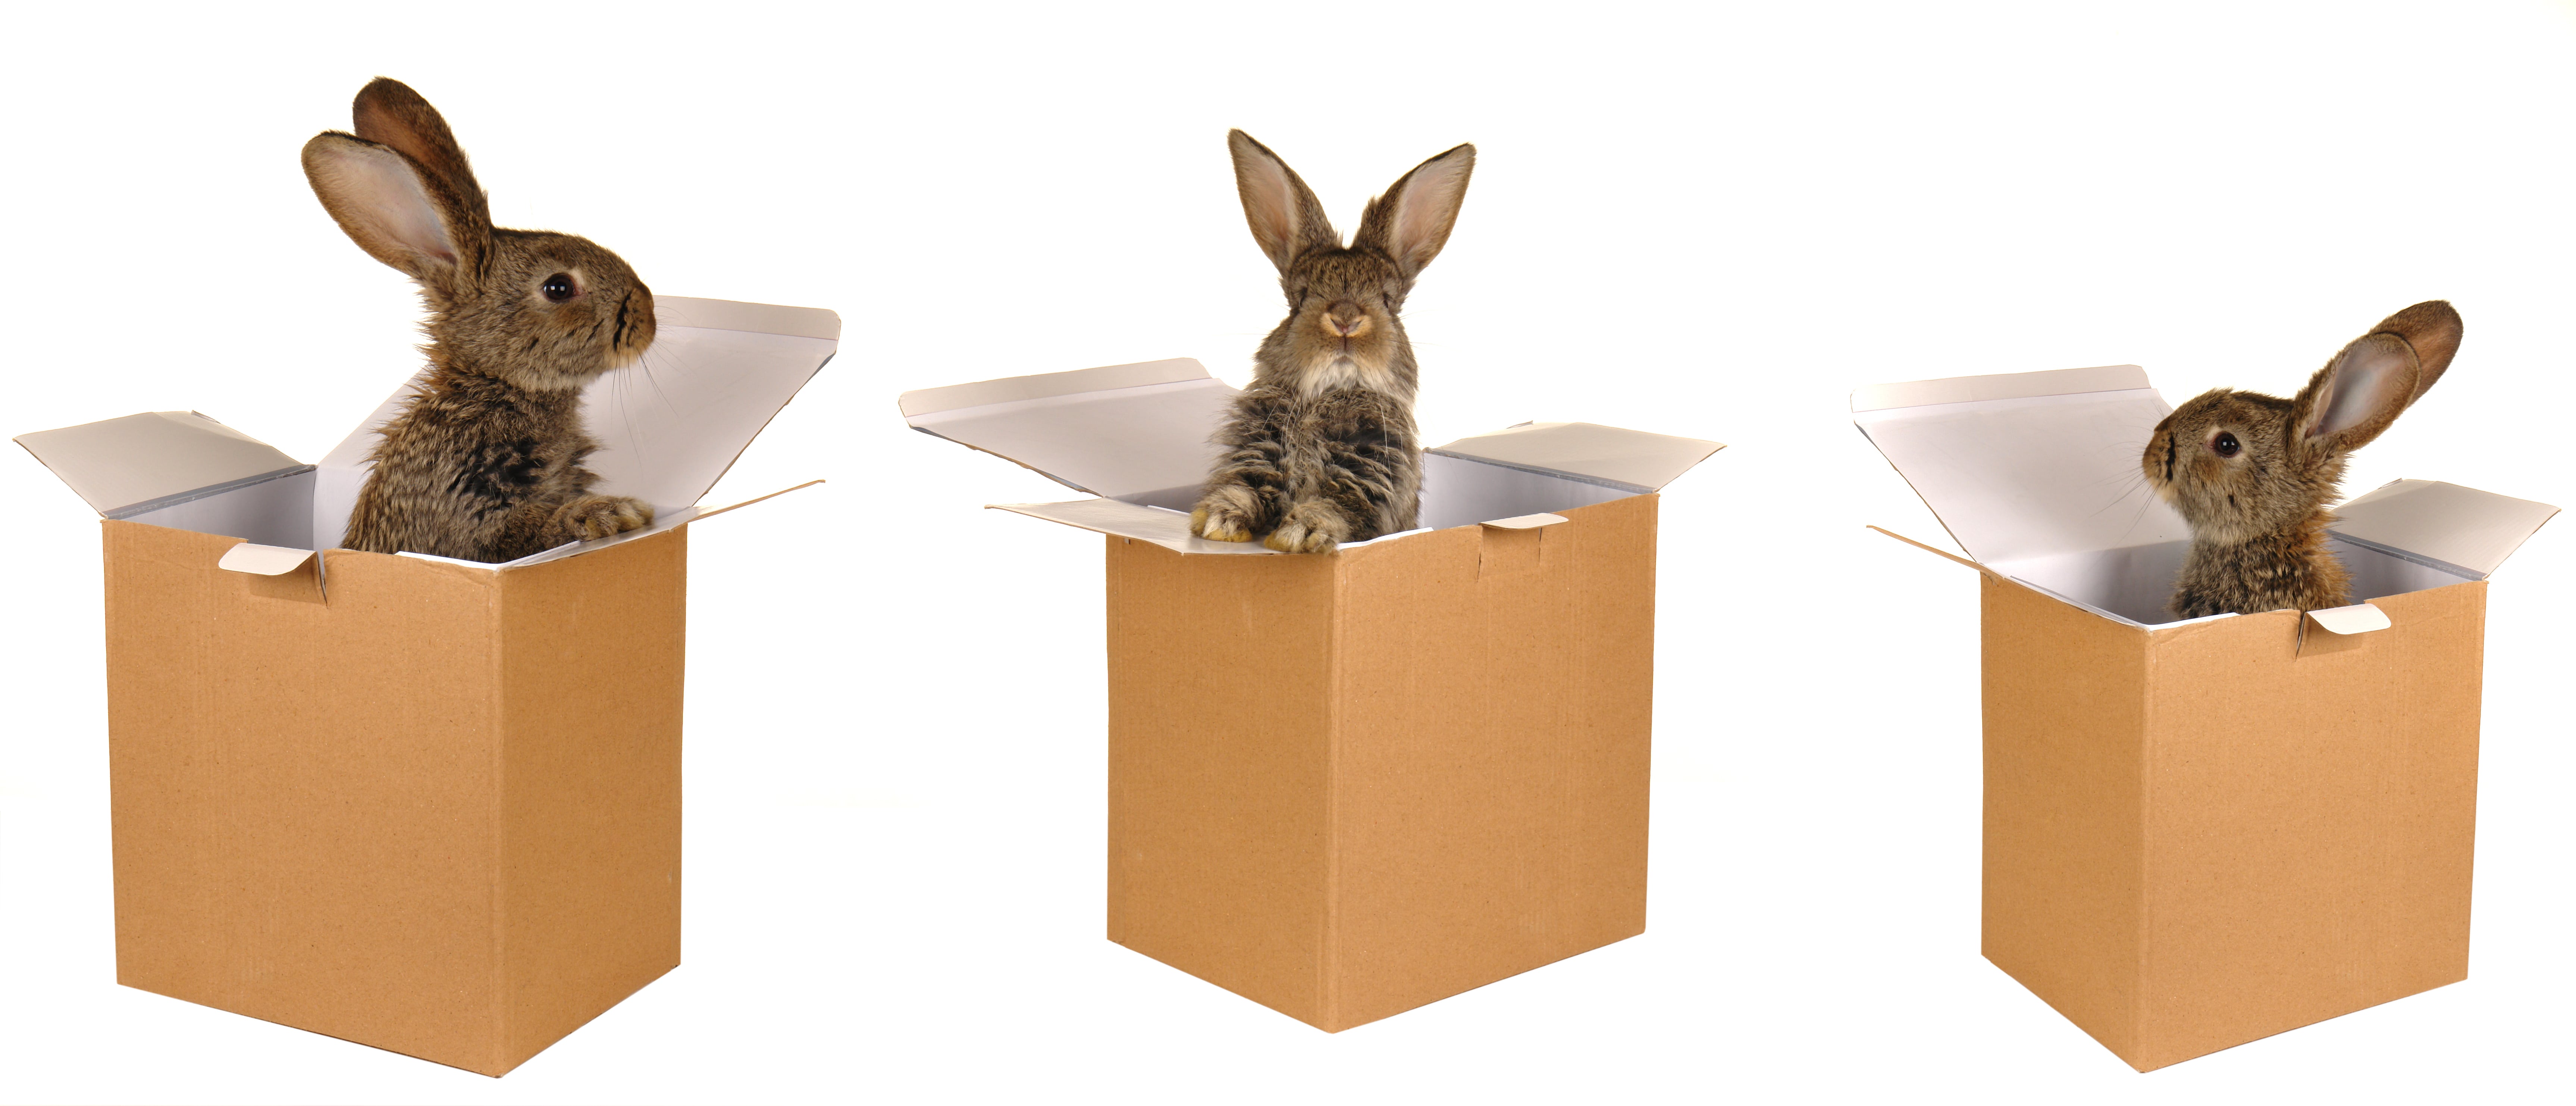 Three cute bunnies in boxes showing that Willow Woods ticks all the boxes of being the best Rabbit & Guinea Pig boarding facility in Melbourne!